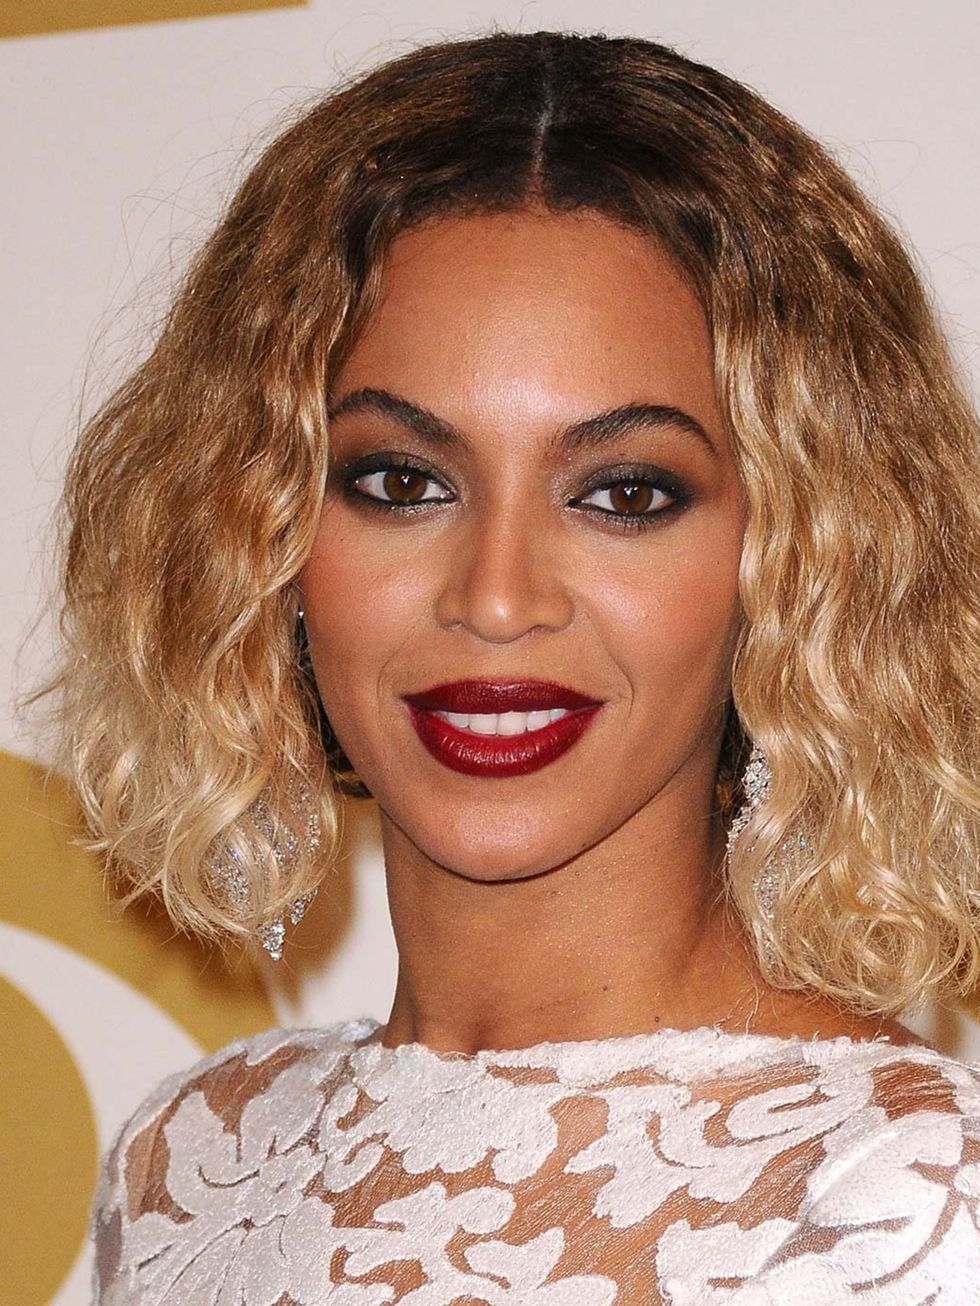 <p><a href="http://www.elleuk.com/star-style/celebrity-style-files/beyonce">Beyonce</a></p>